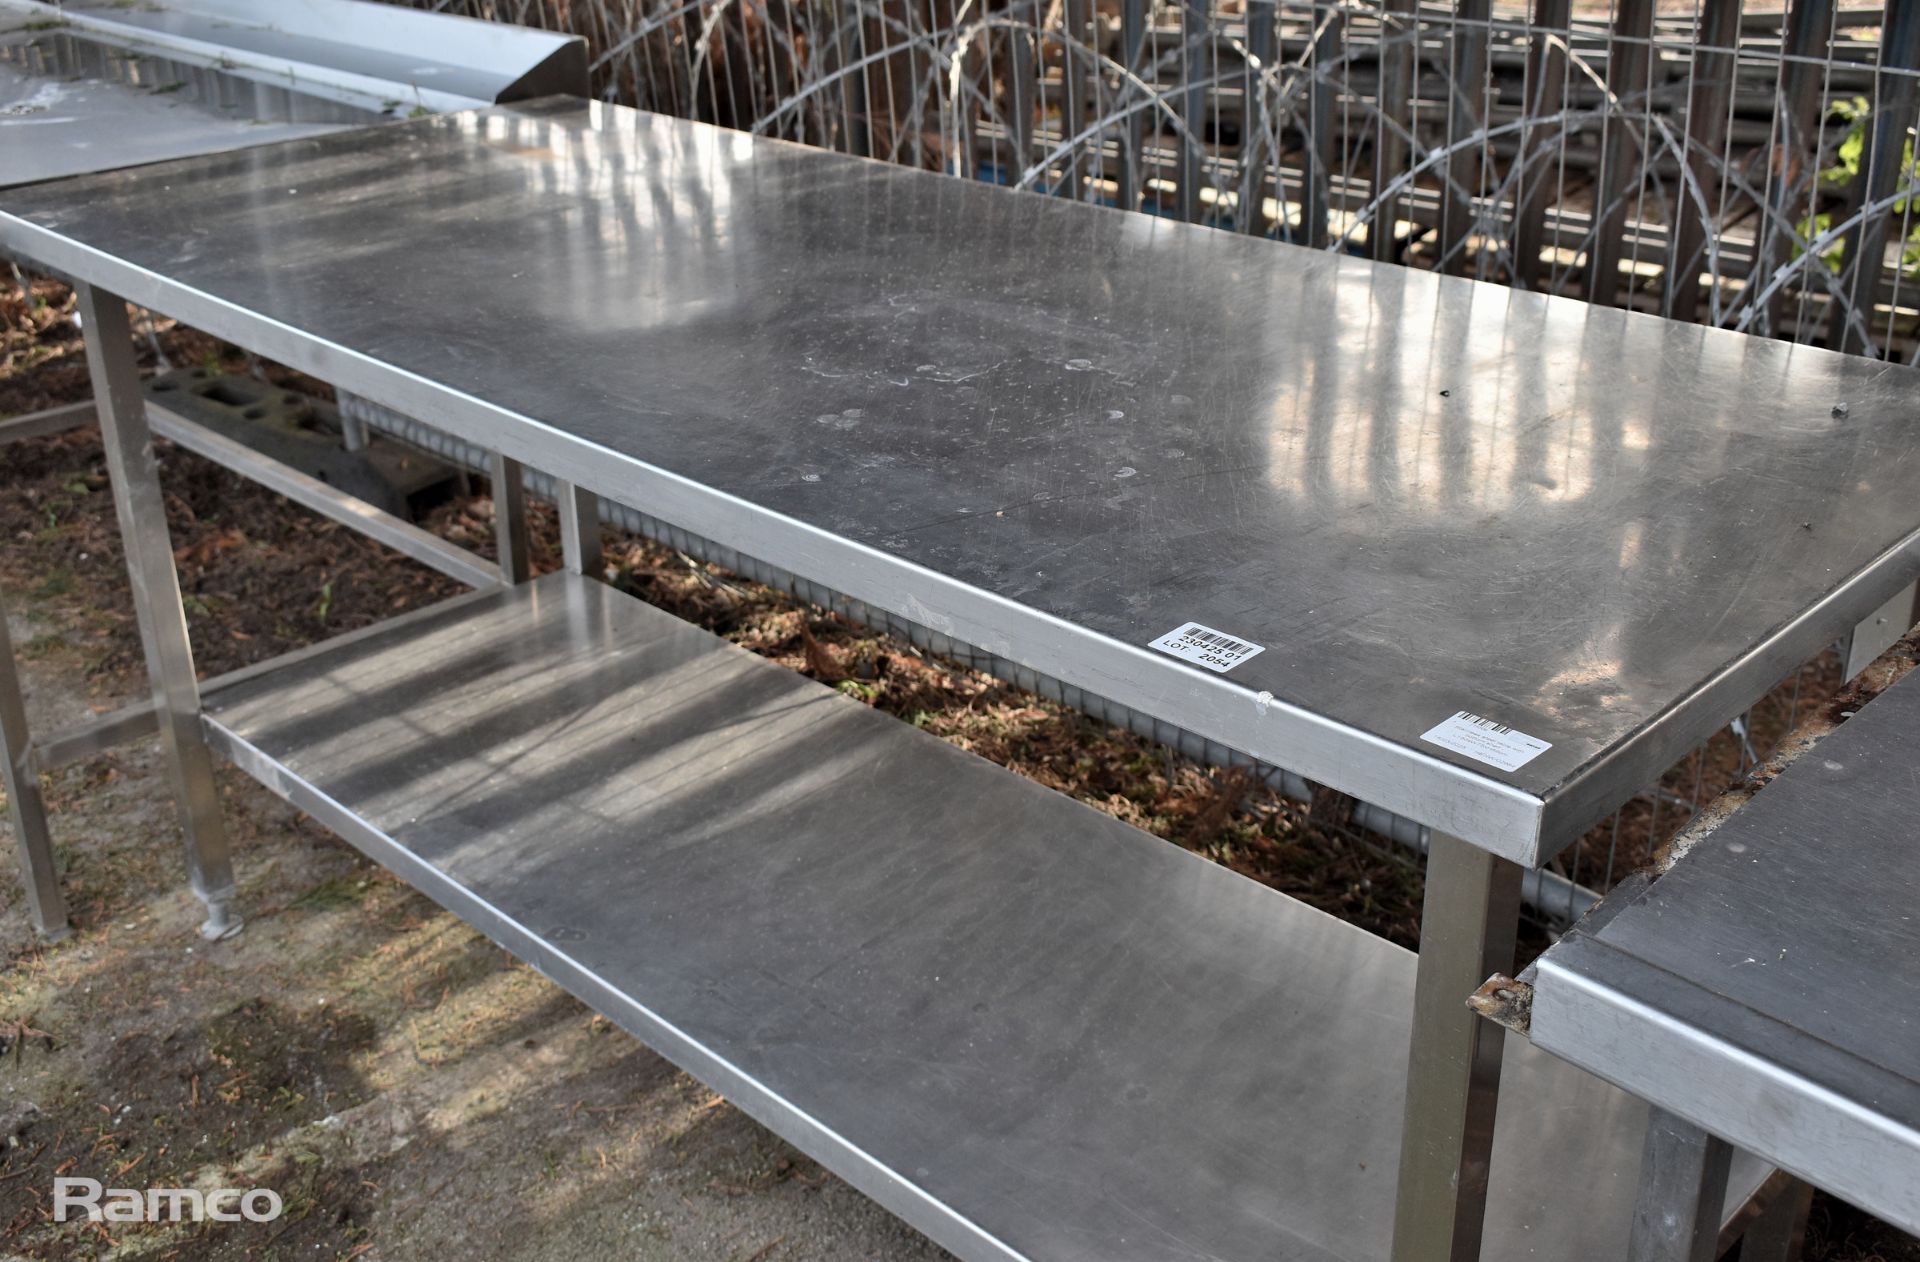 Stainless steel draining table - L 124 x W 89 x H 97cm, Stainless steel table with bottom shelf - Image 3 of 9